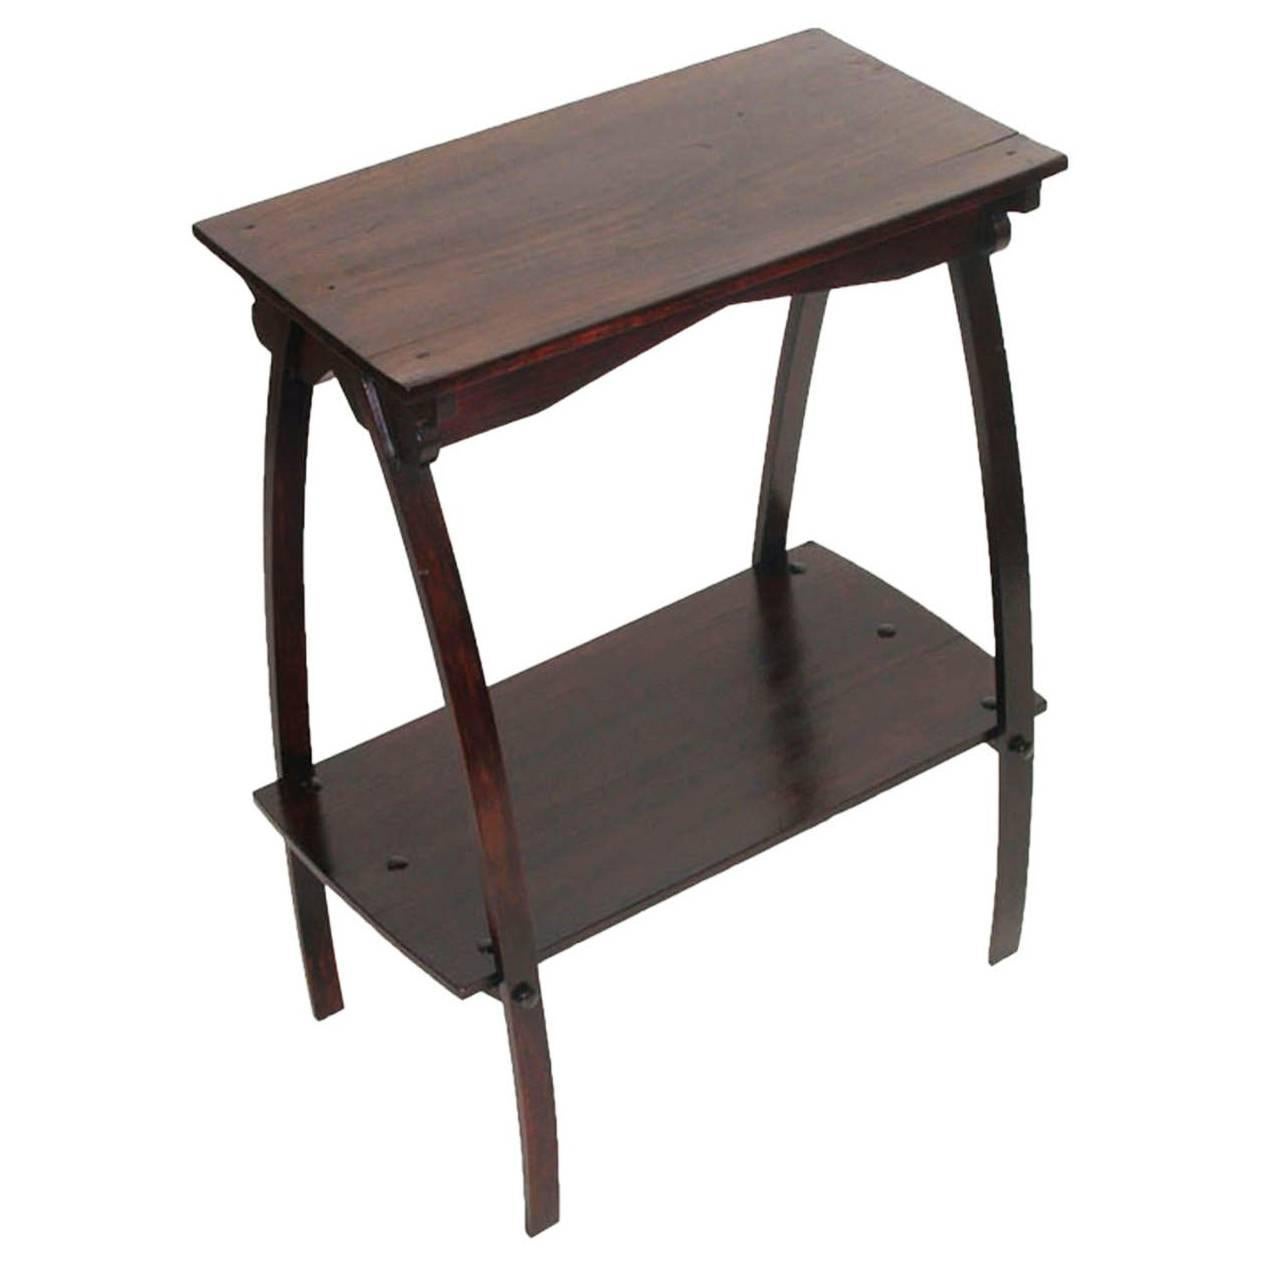 Italy 1920s  Art Deco Console Étagère Side Table in Walnut , Wax polished